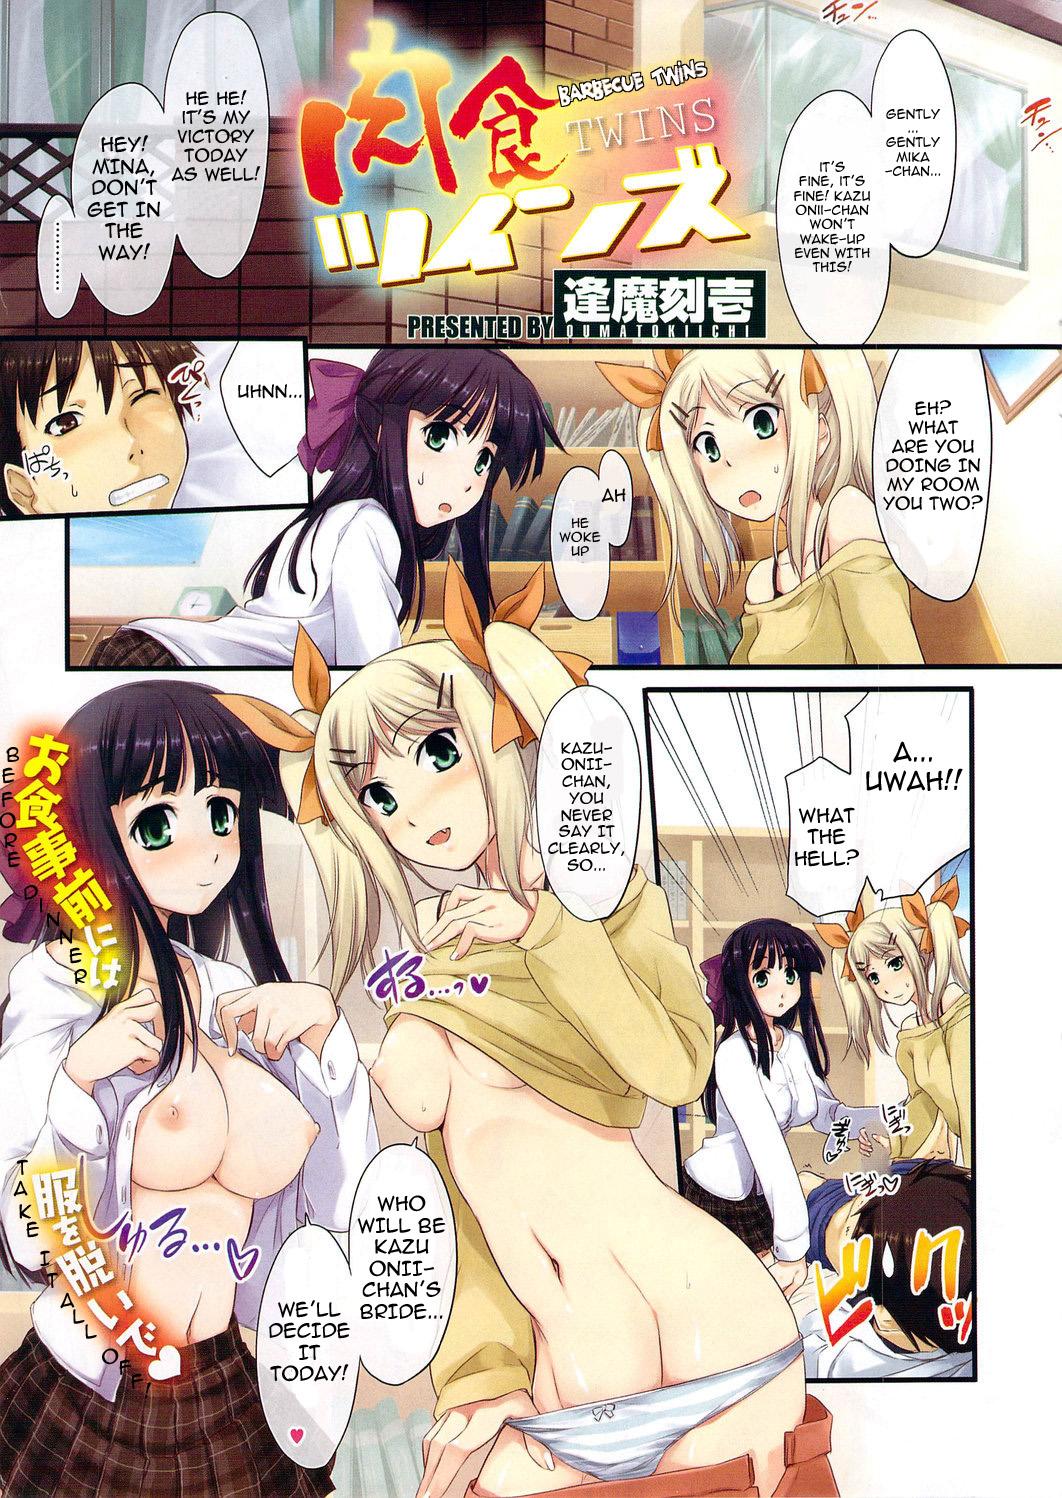 Whore [Anthology] Short Full-Color H-Manga Chapters [Eng] {doujin-moe.us} Top - Page 7